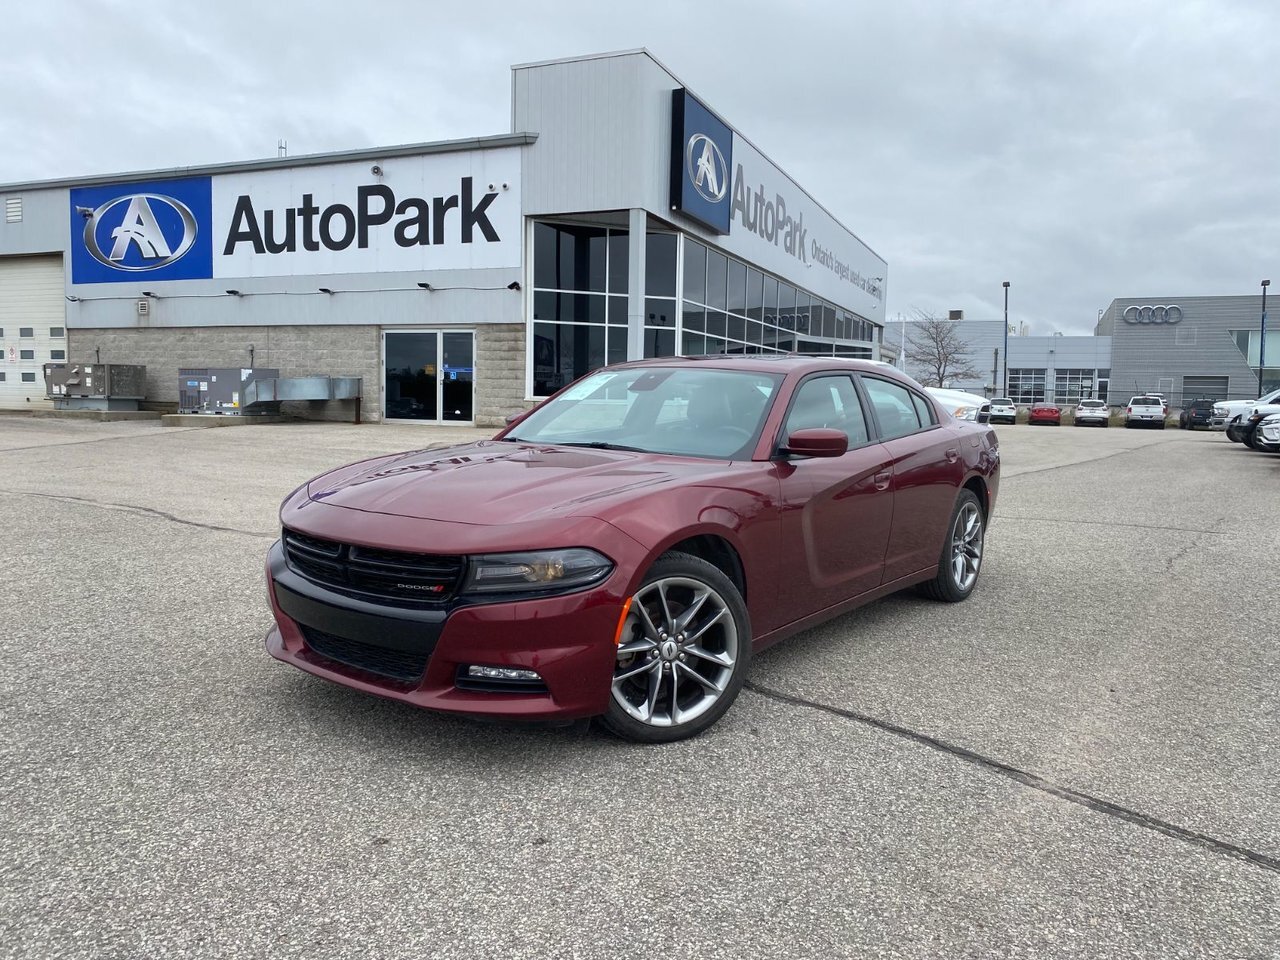 2021 Dodge Charger SXT AWD | Remote Start | Heated Seats + Steering W